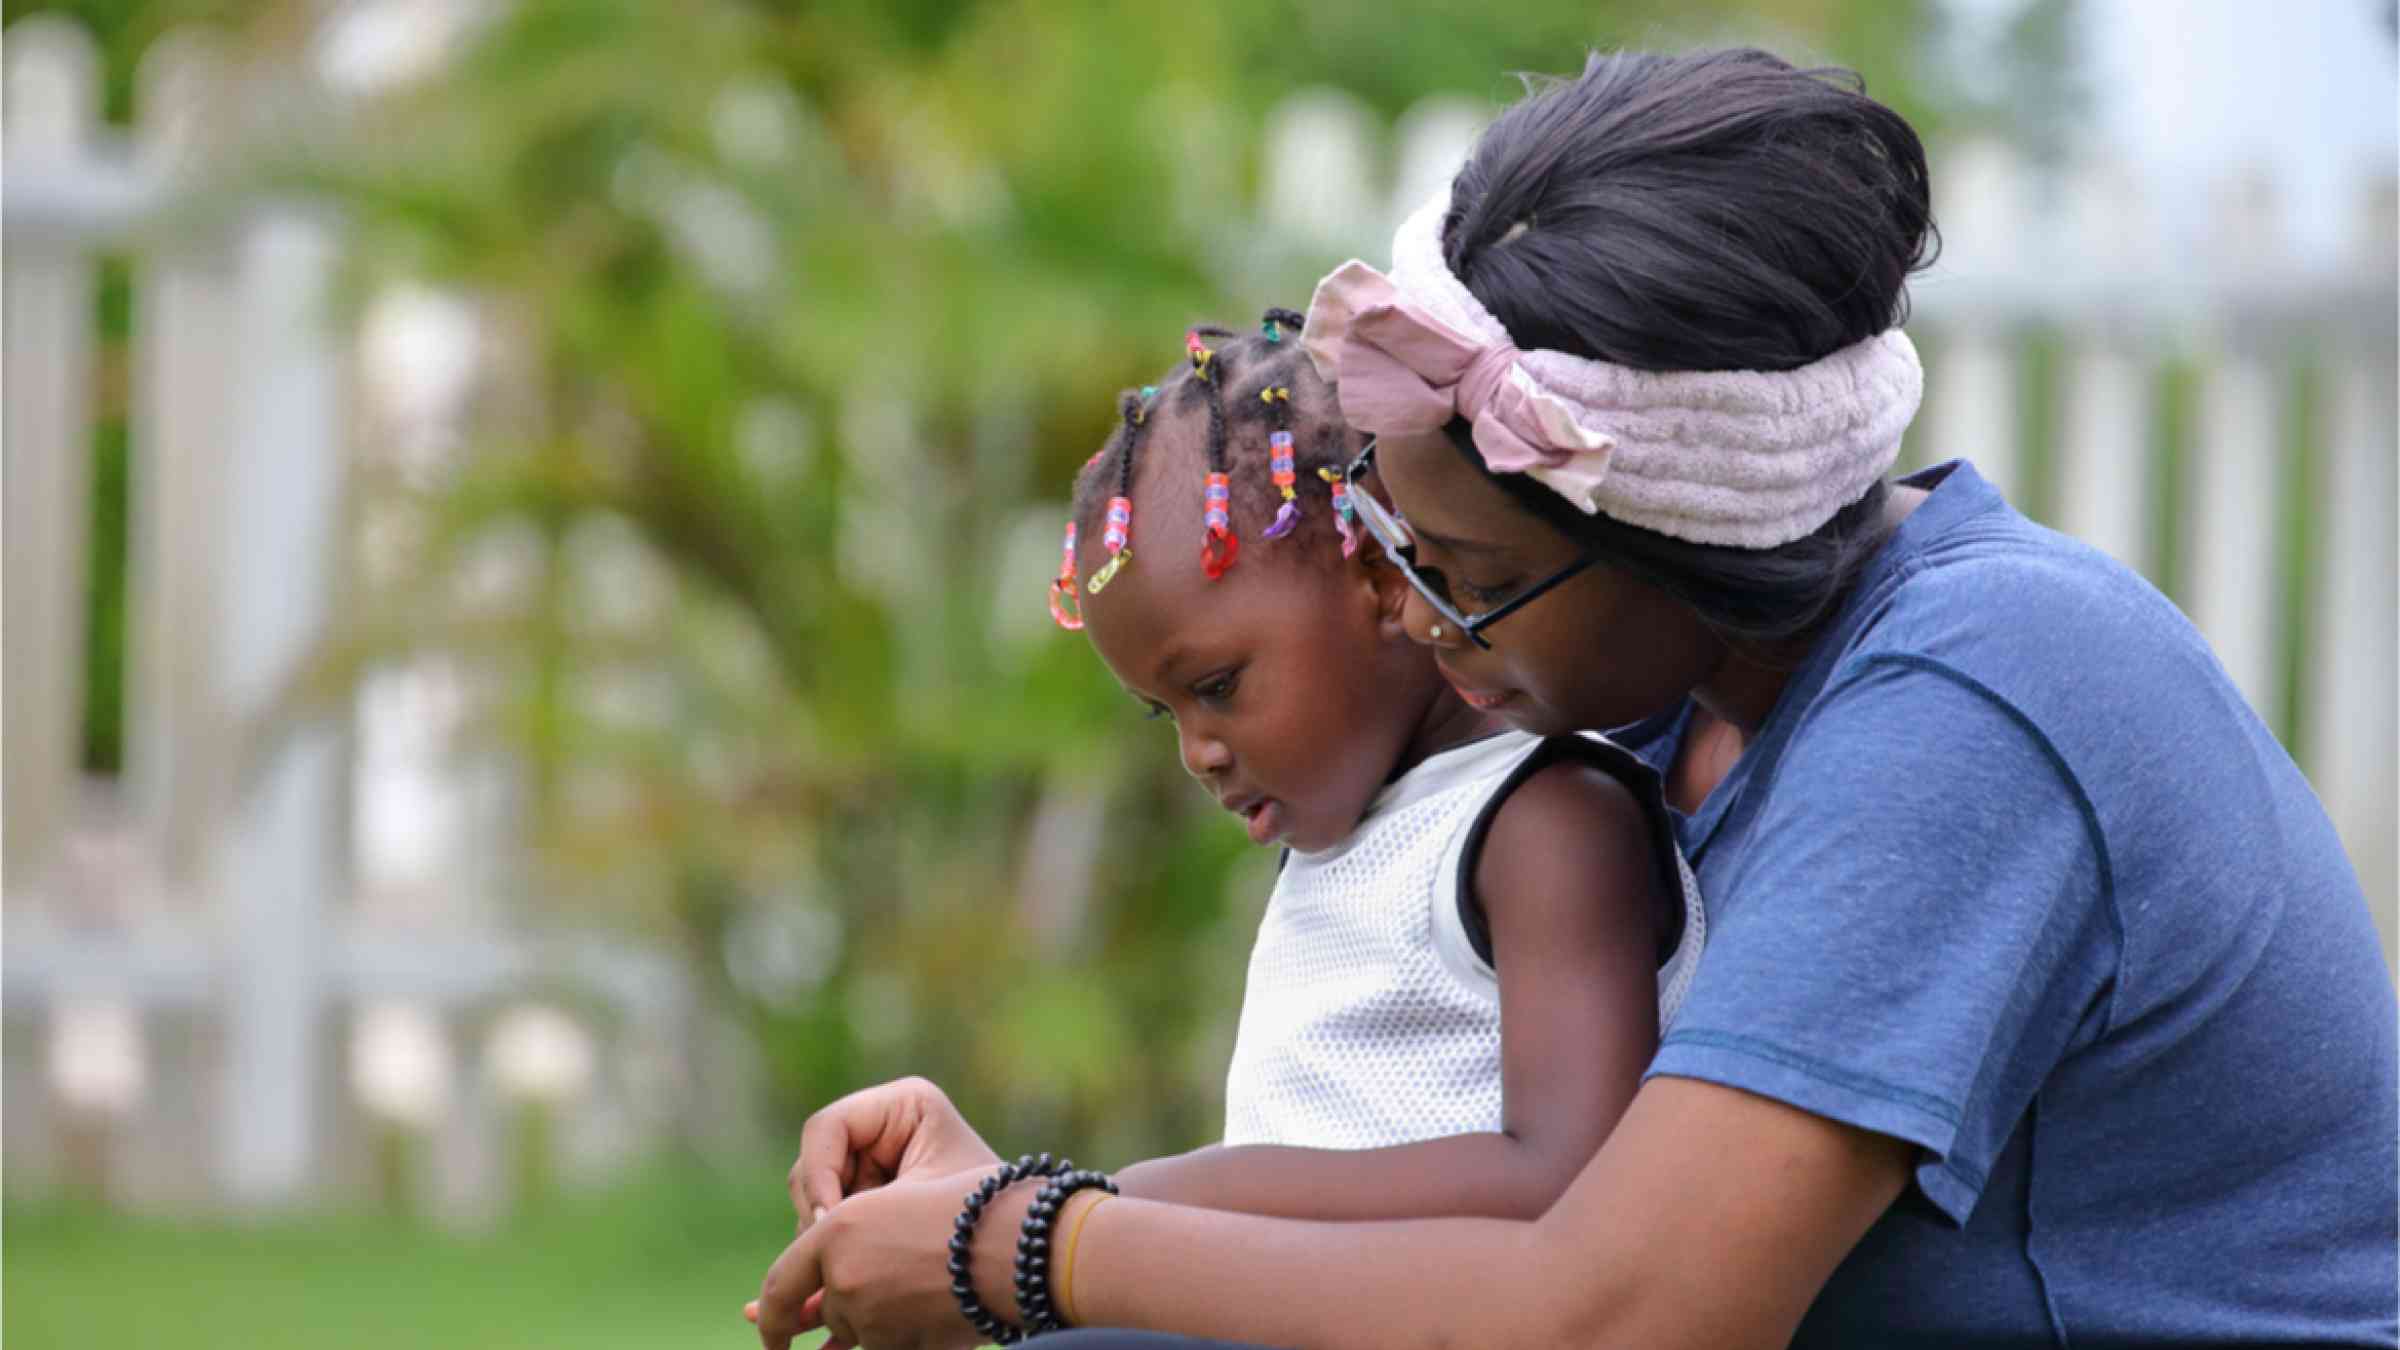 This image shows an African American woman with her daughter outside in the green neighborhood.